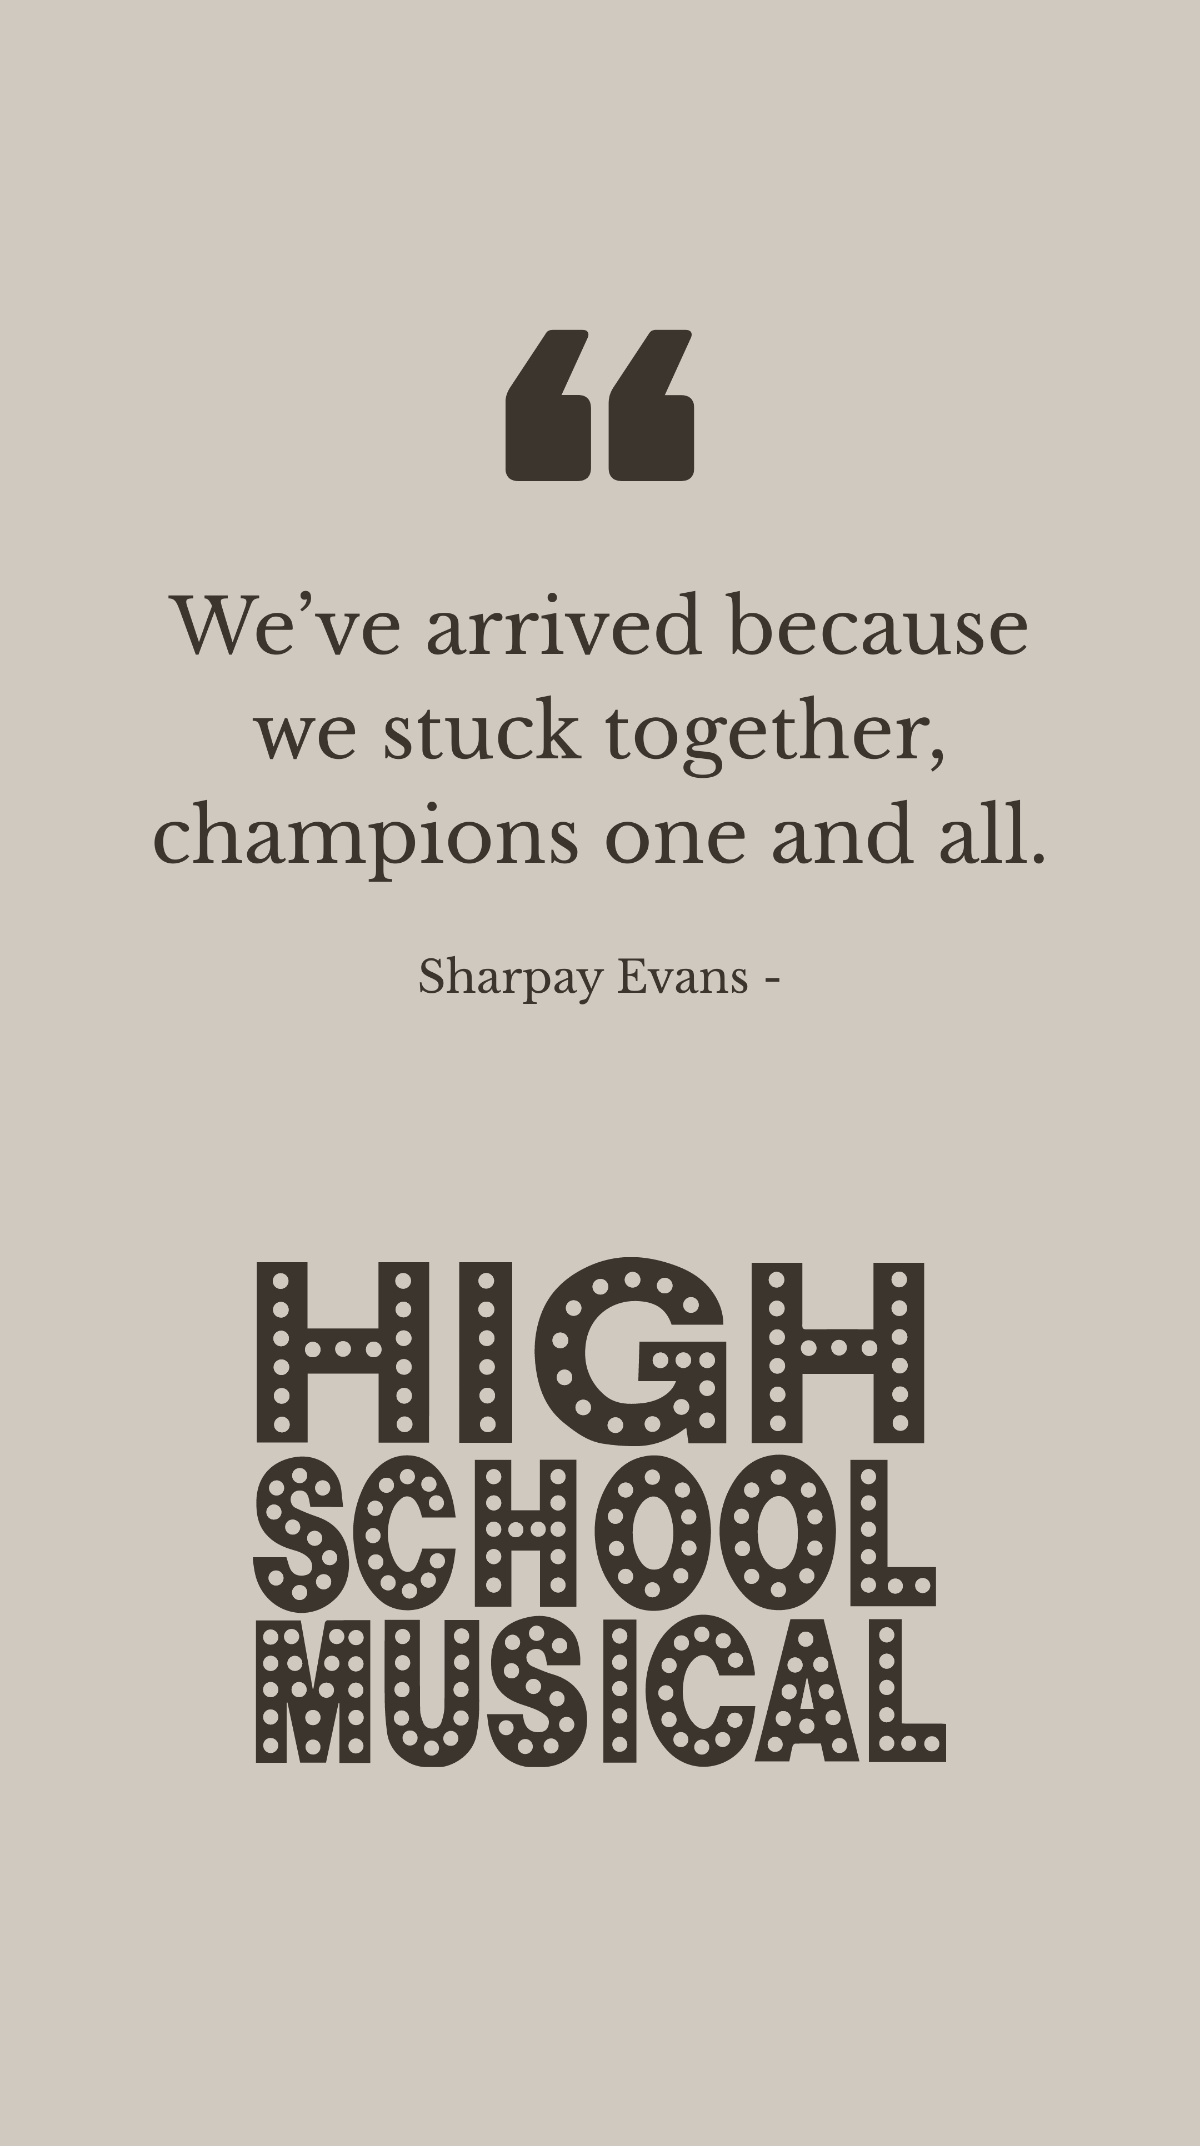 Free Sharpay Evans - We’ve arrived because we stuck together, champions one and all. Template